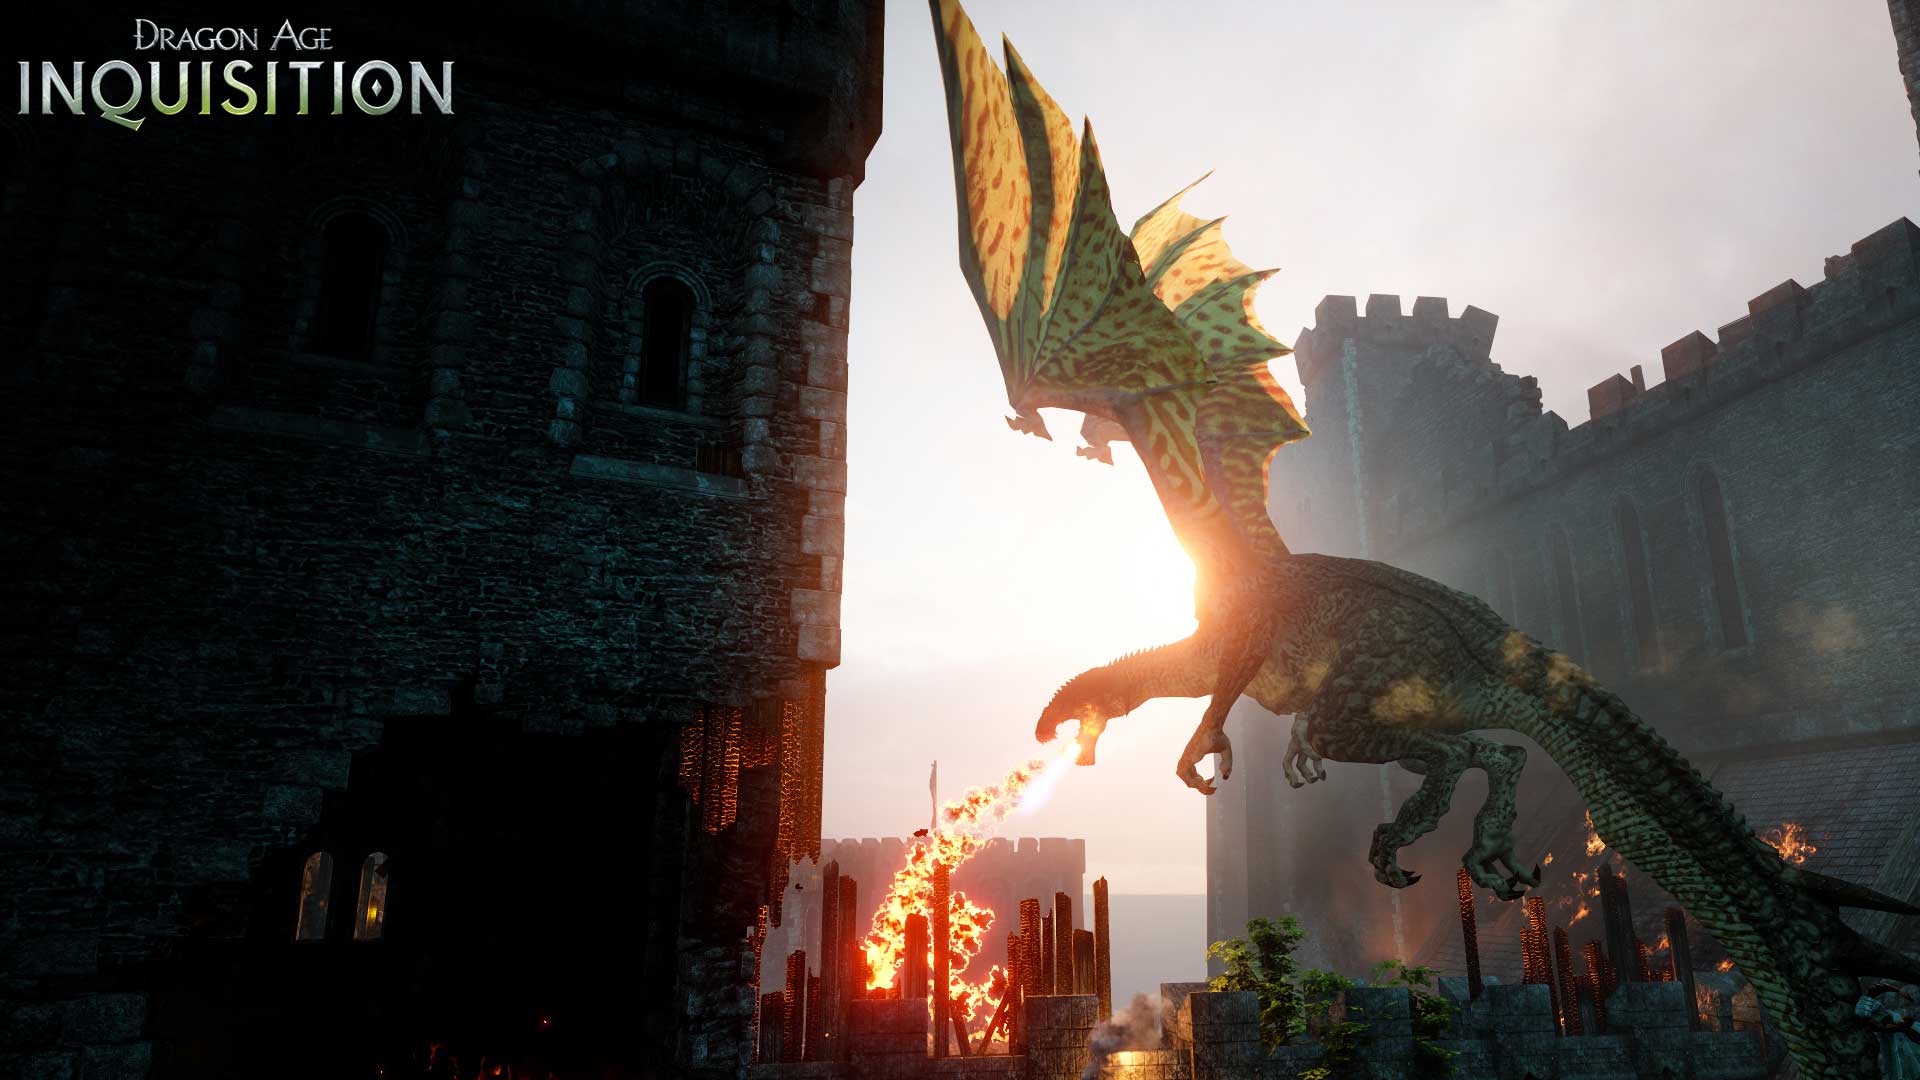 Image for Dragon Age: Inquisition players have slain over 3.4 million dragons; other EA game stats